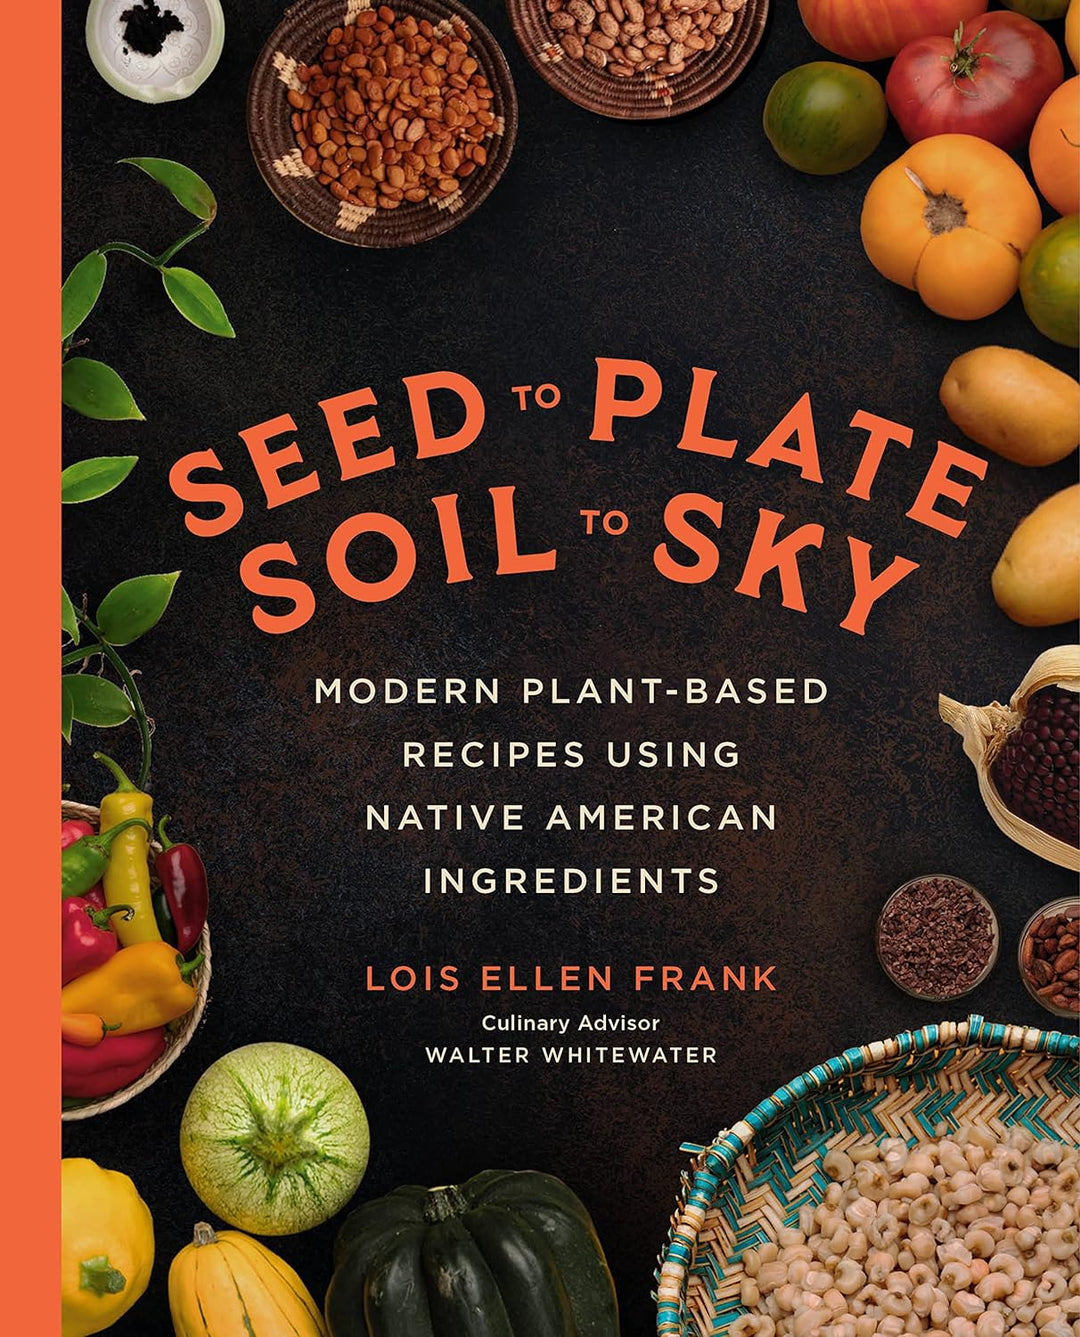 Seed to Plate, Soil to Sky: Modern Plant-Based Recipes Using Native American Ingredients by Lois Ellen Frank